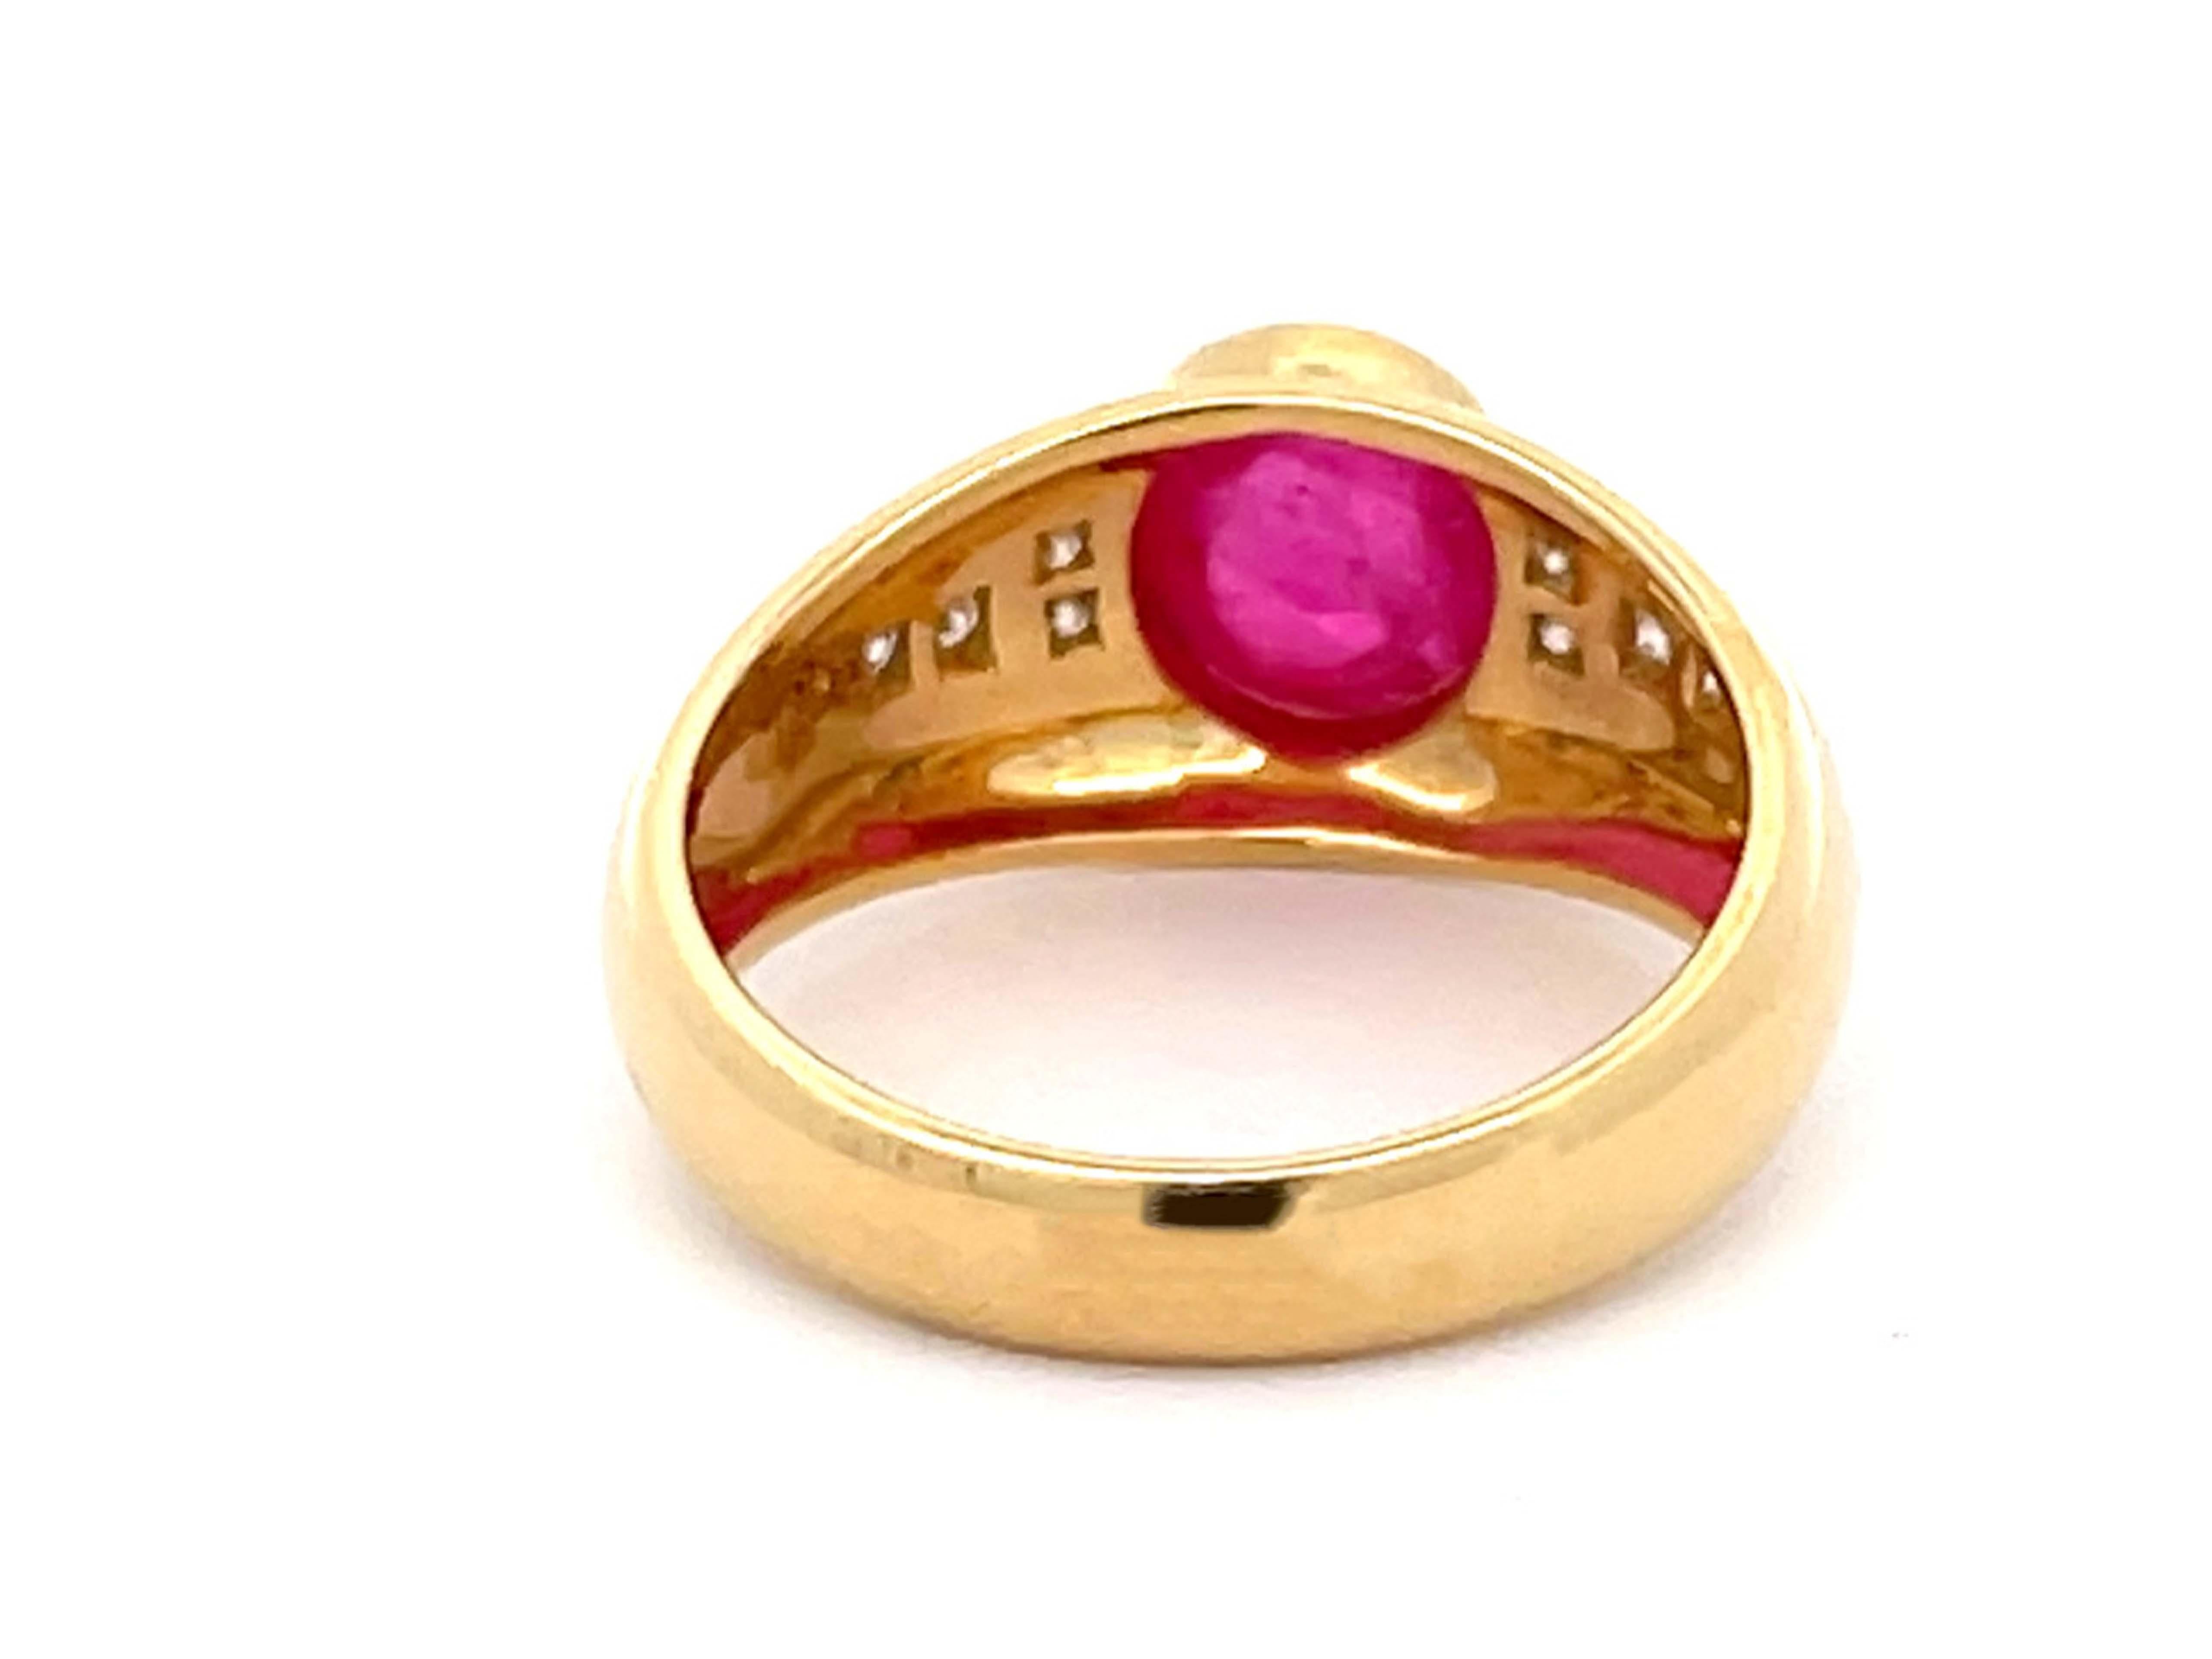 Women's Vintage Cabochon Red Ruby and Eight Diamond Ring in 18k Yellow Gold